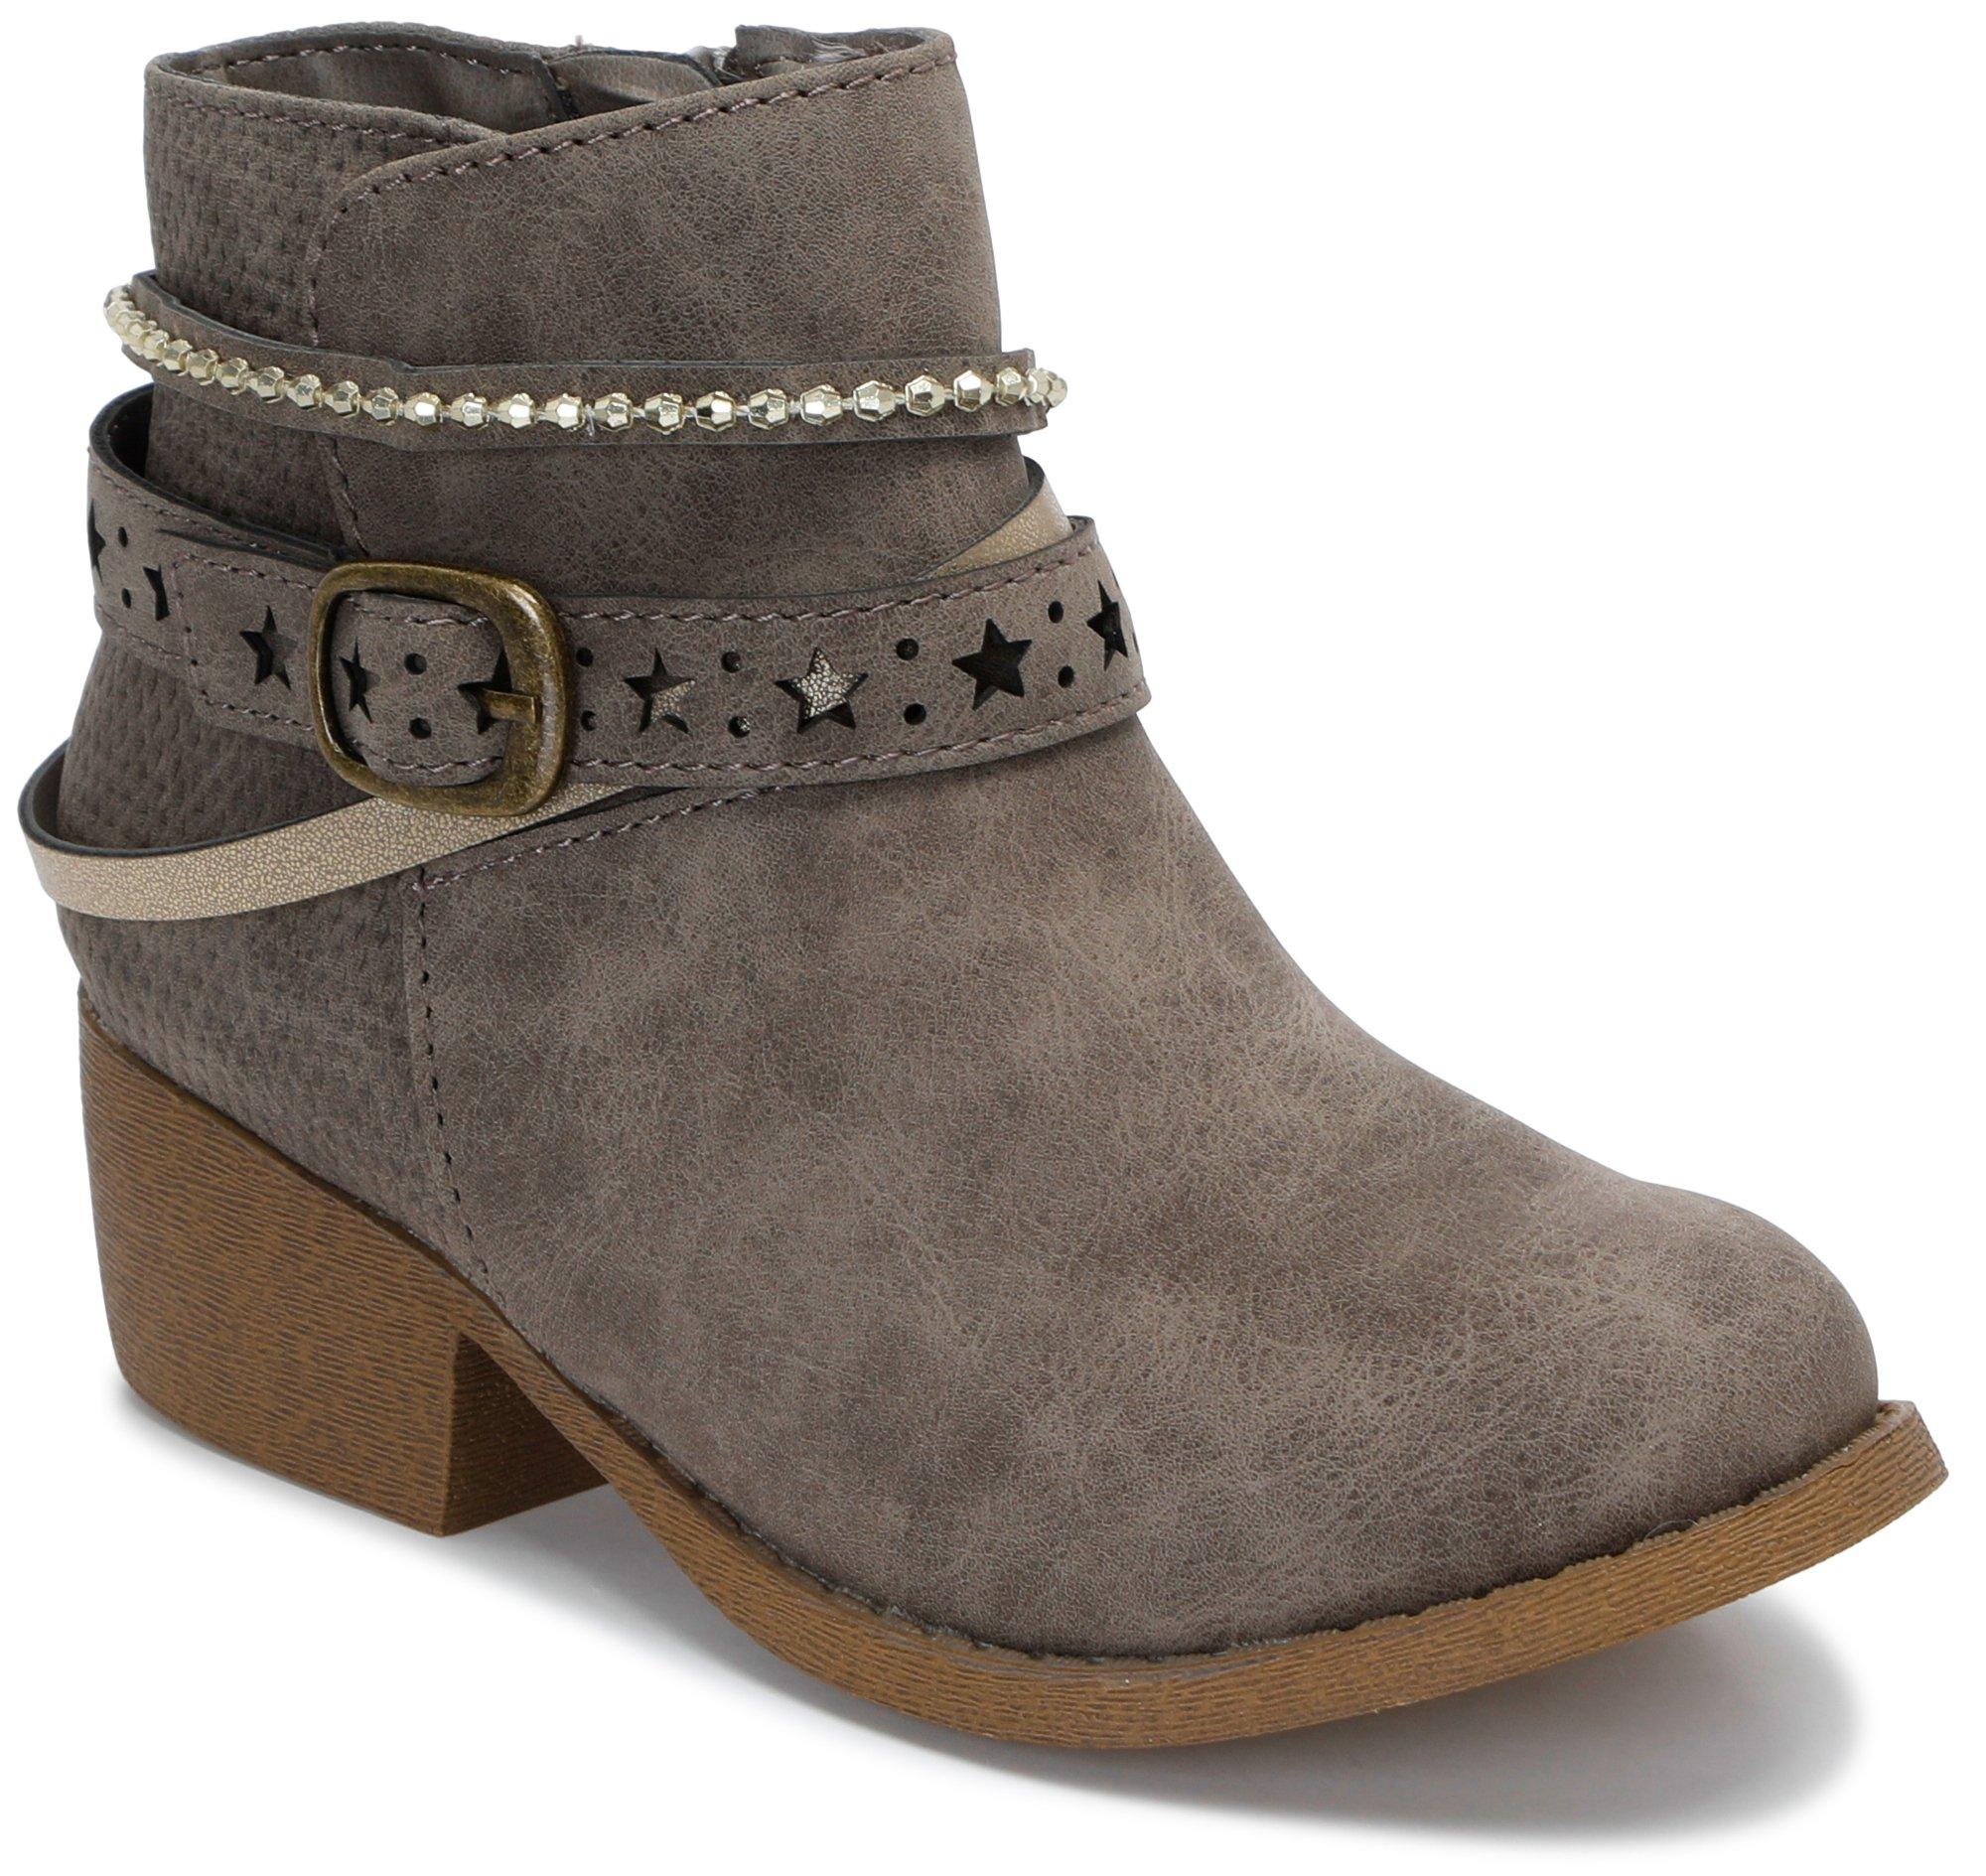 Girls Striking Casual Ankle Boots